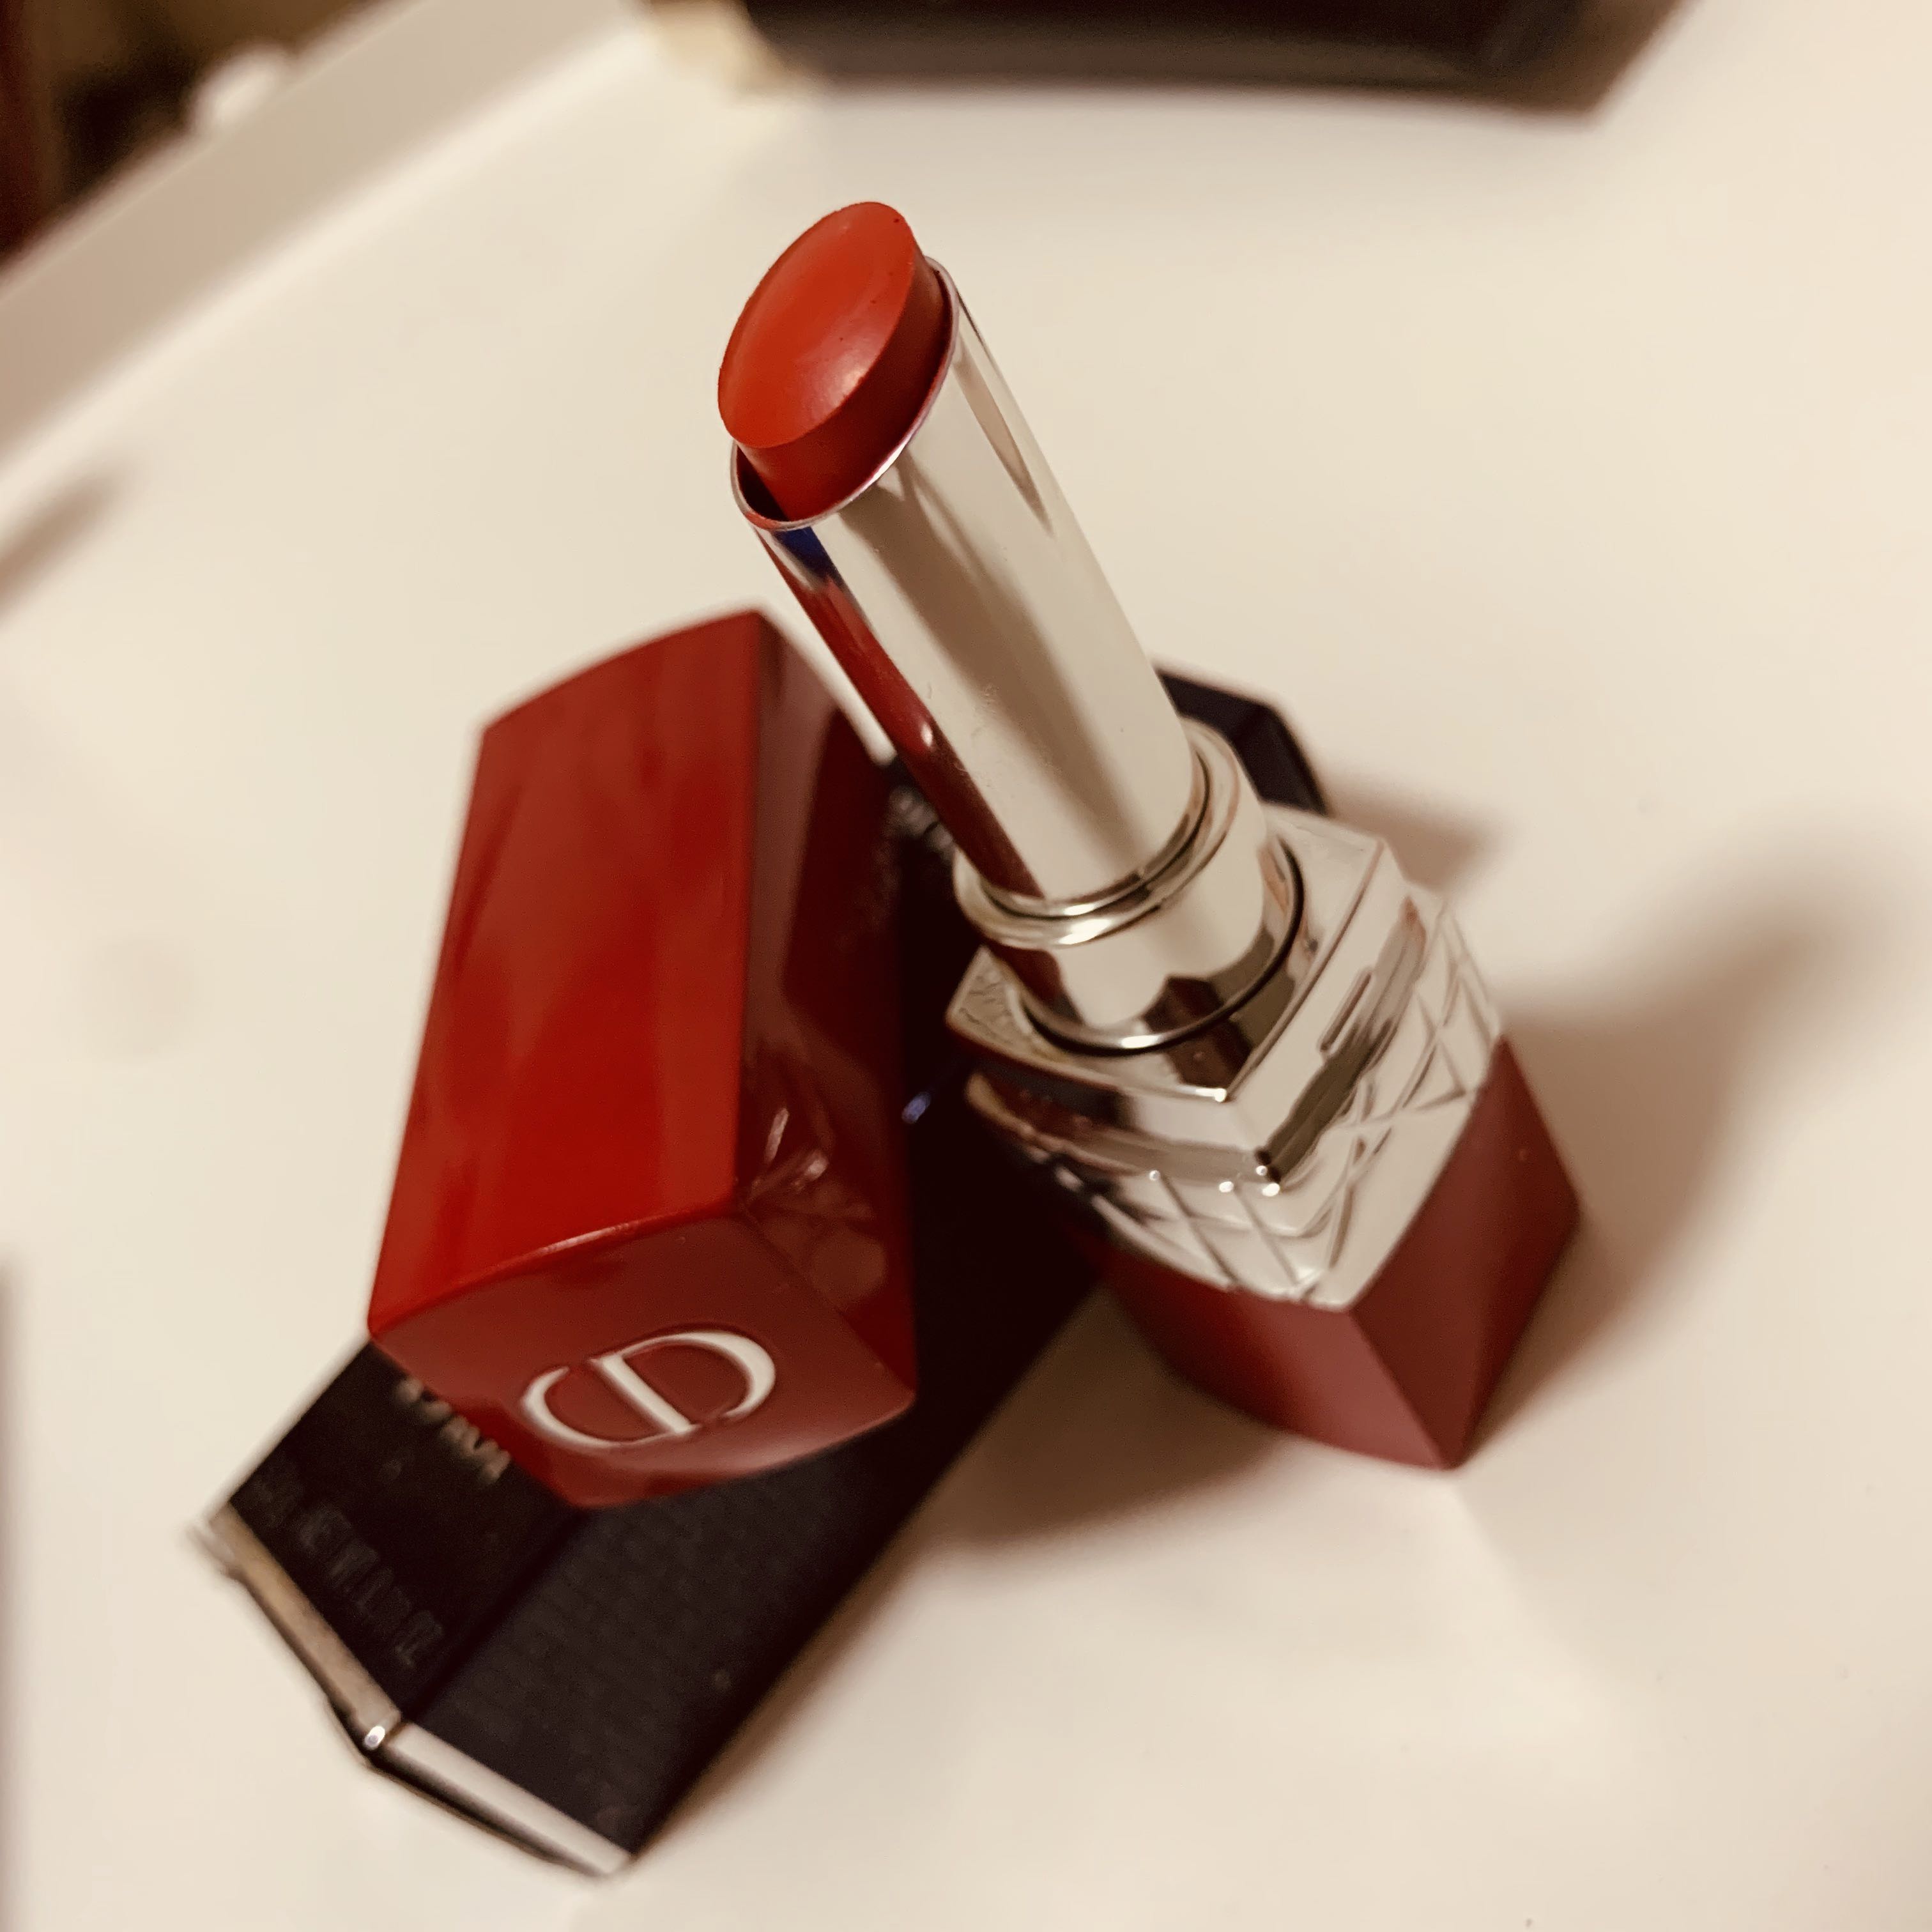 Review Son Dior Addict Lacquer Plump 777 Diorly Hồng Berry